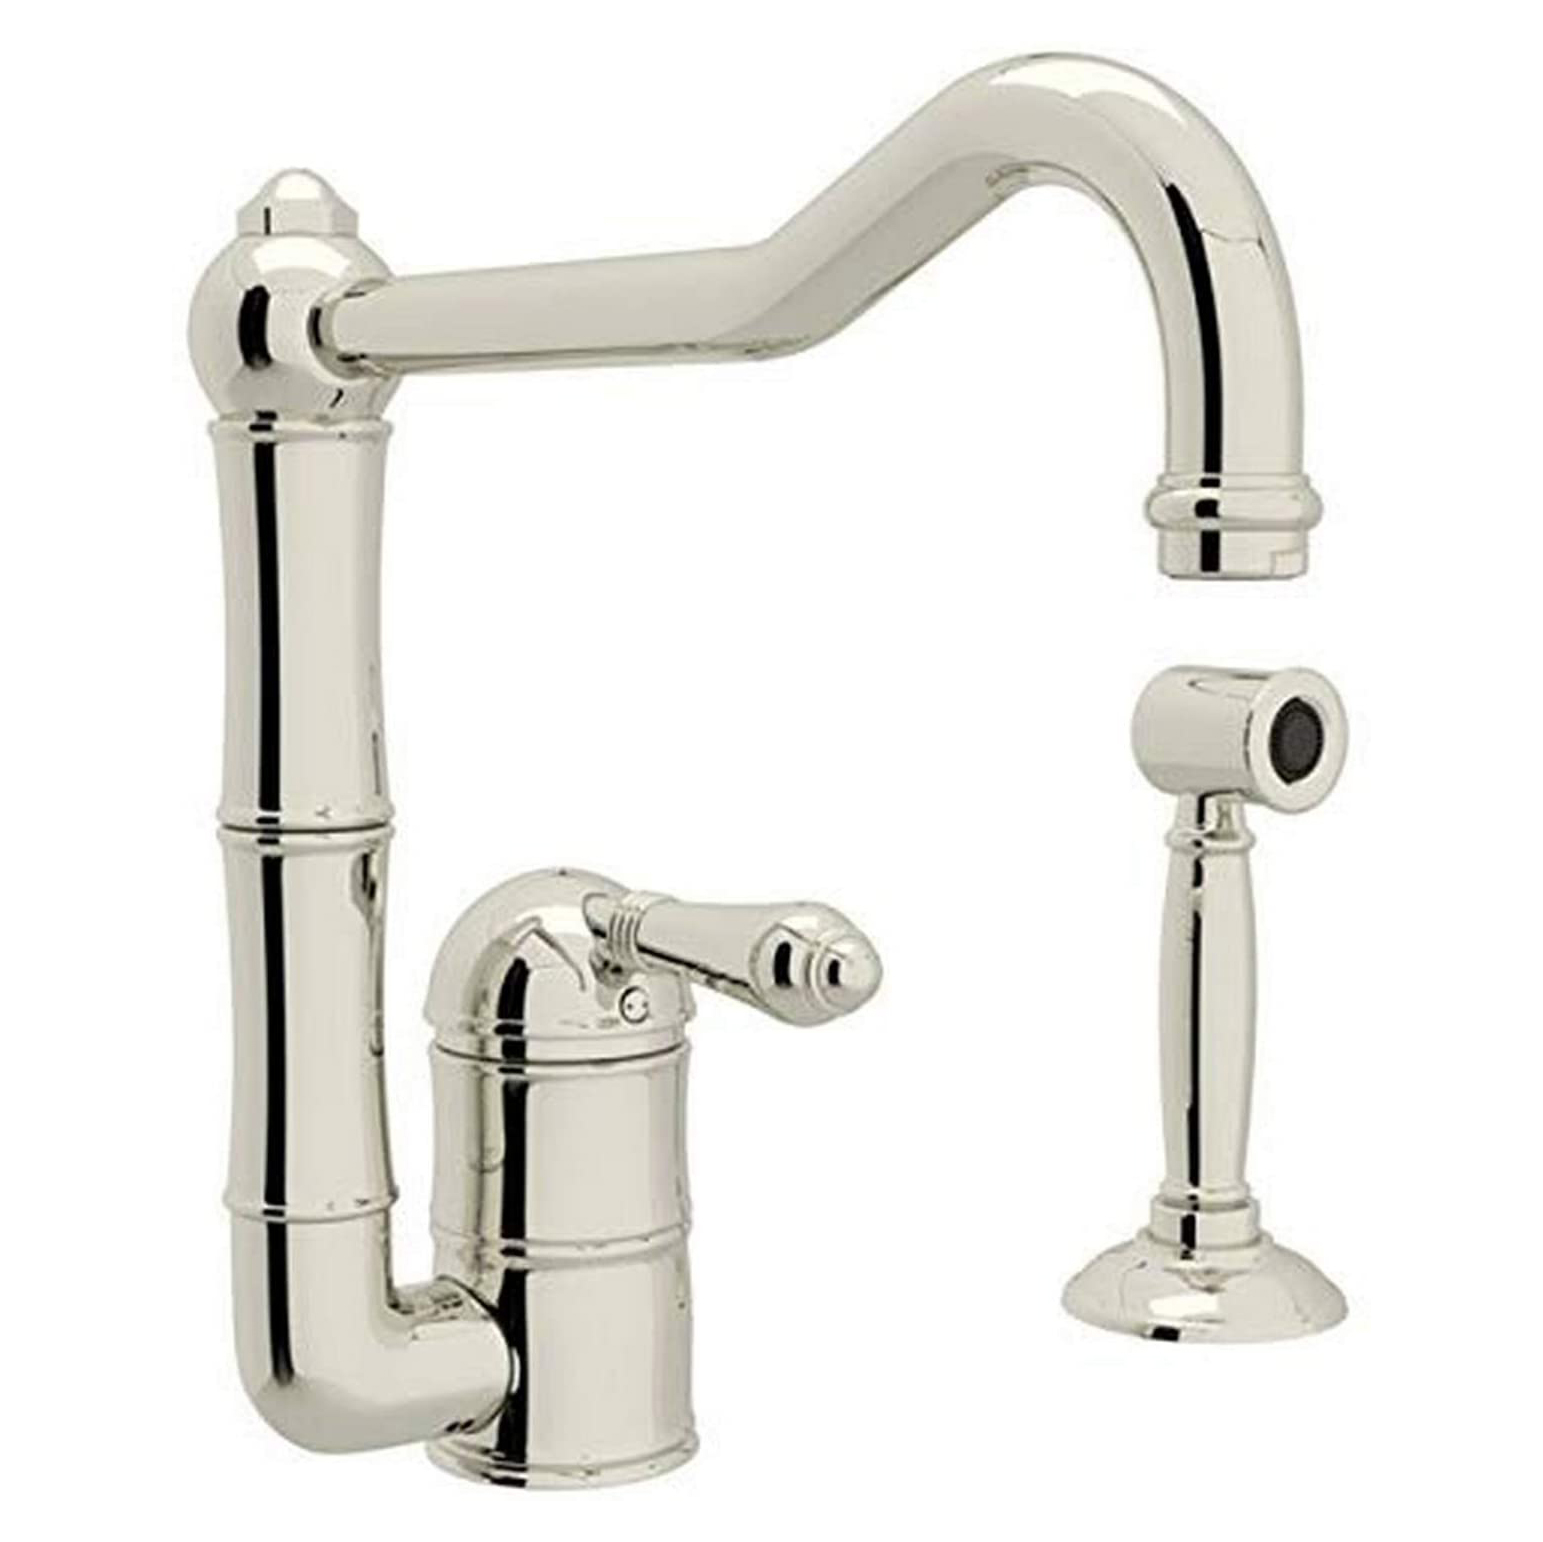 Italian Country Kitchen Faucet in Polished Nickel w/Metal Lever & Spray